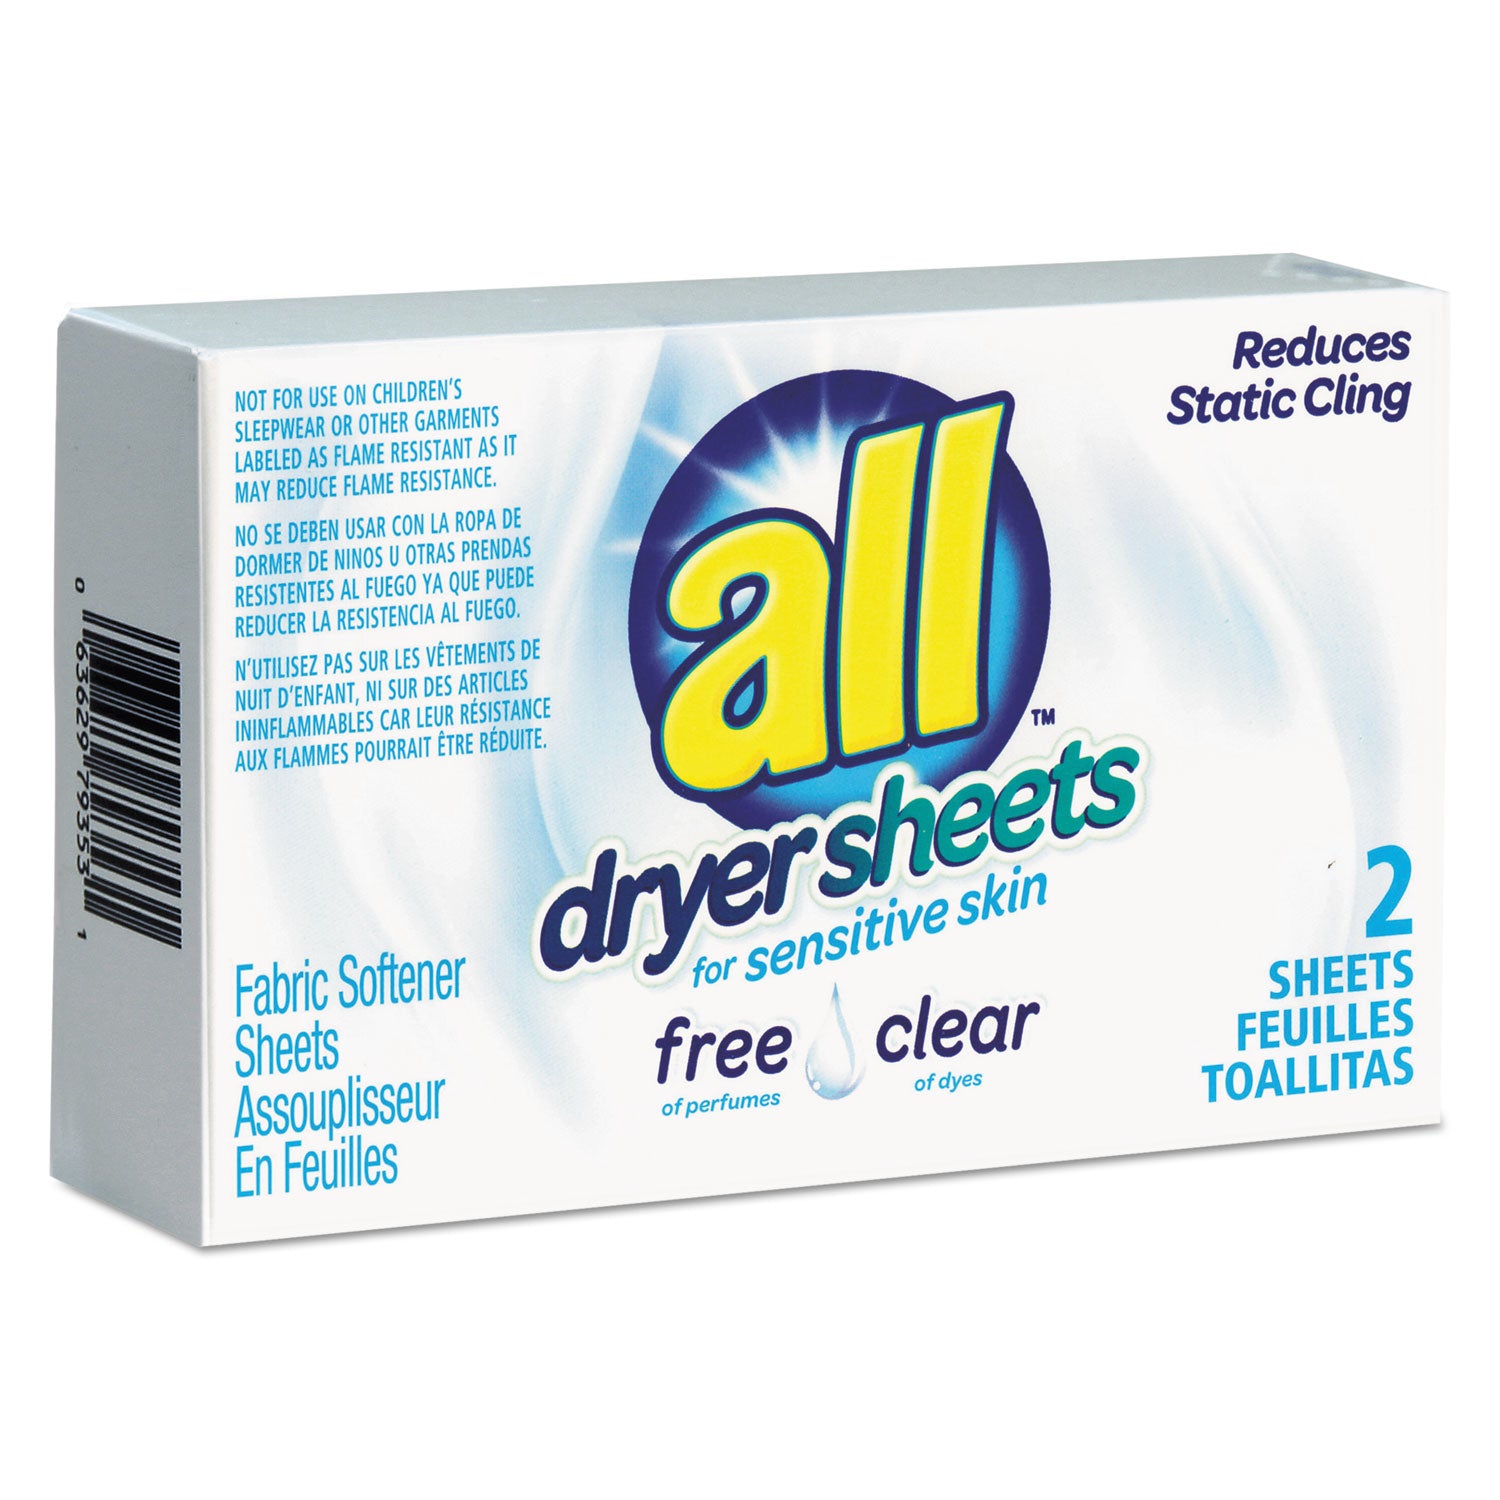 free-clear-vend-pack-dryer-sheets-fragrance-free-2-sheets-box-100-box-carton_ven2979353 - 1